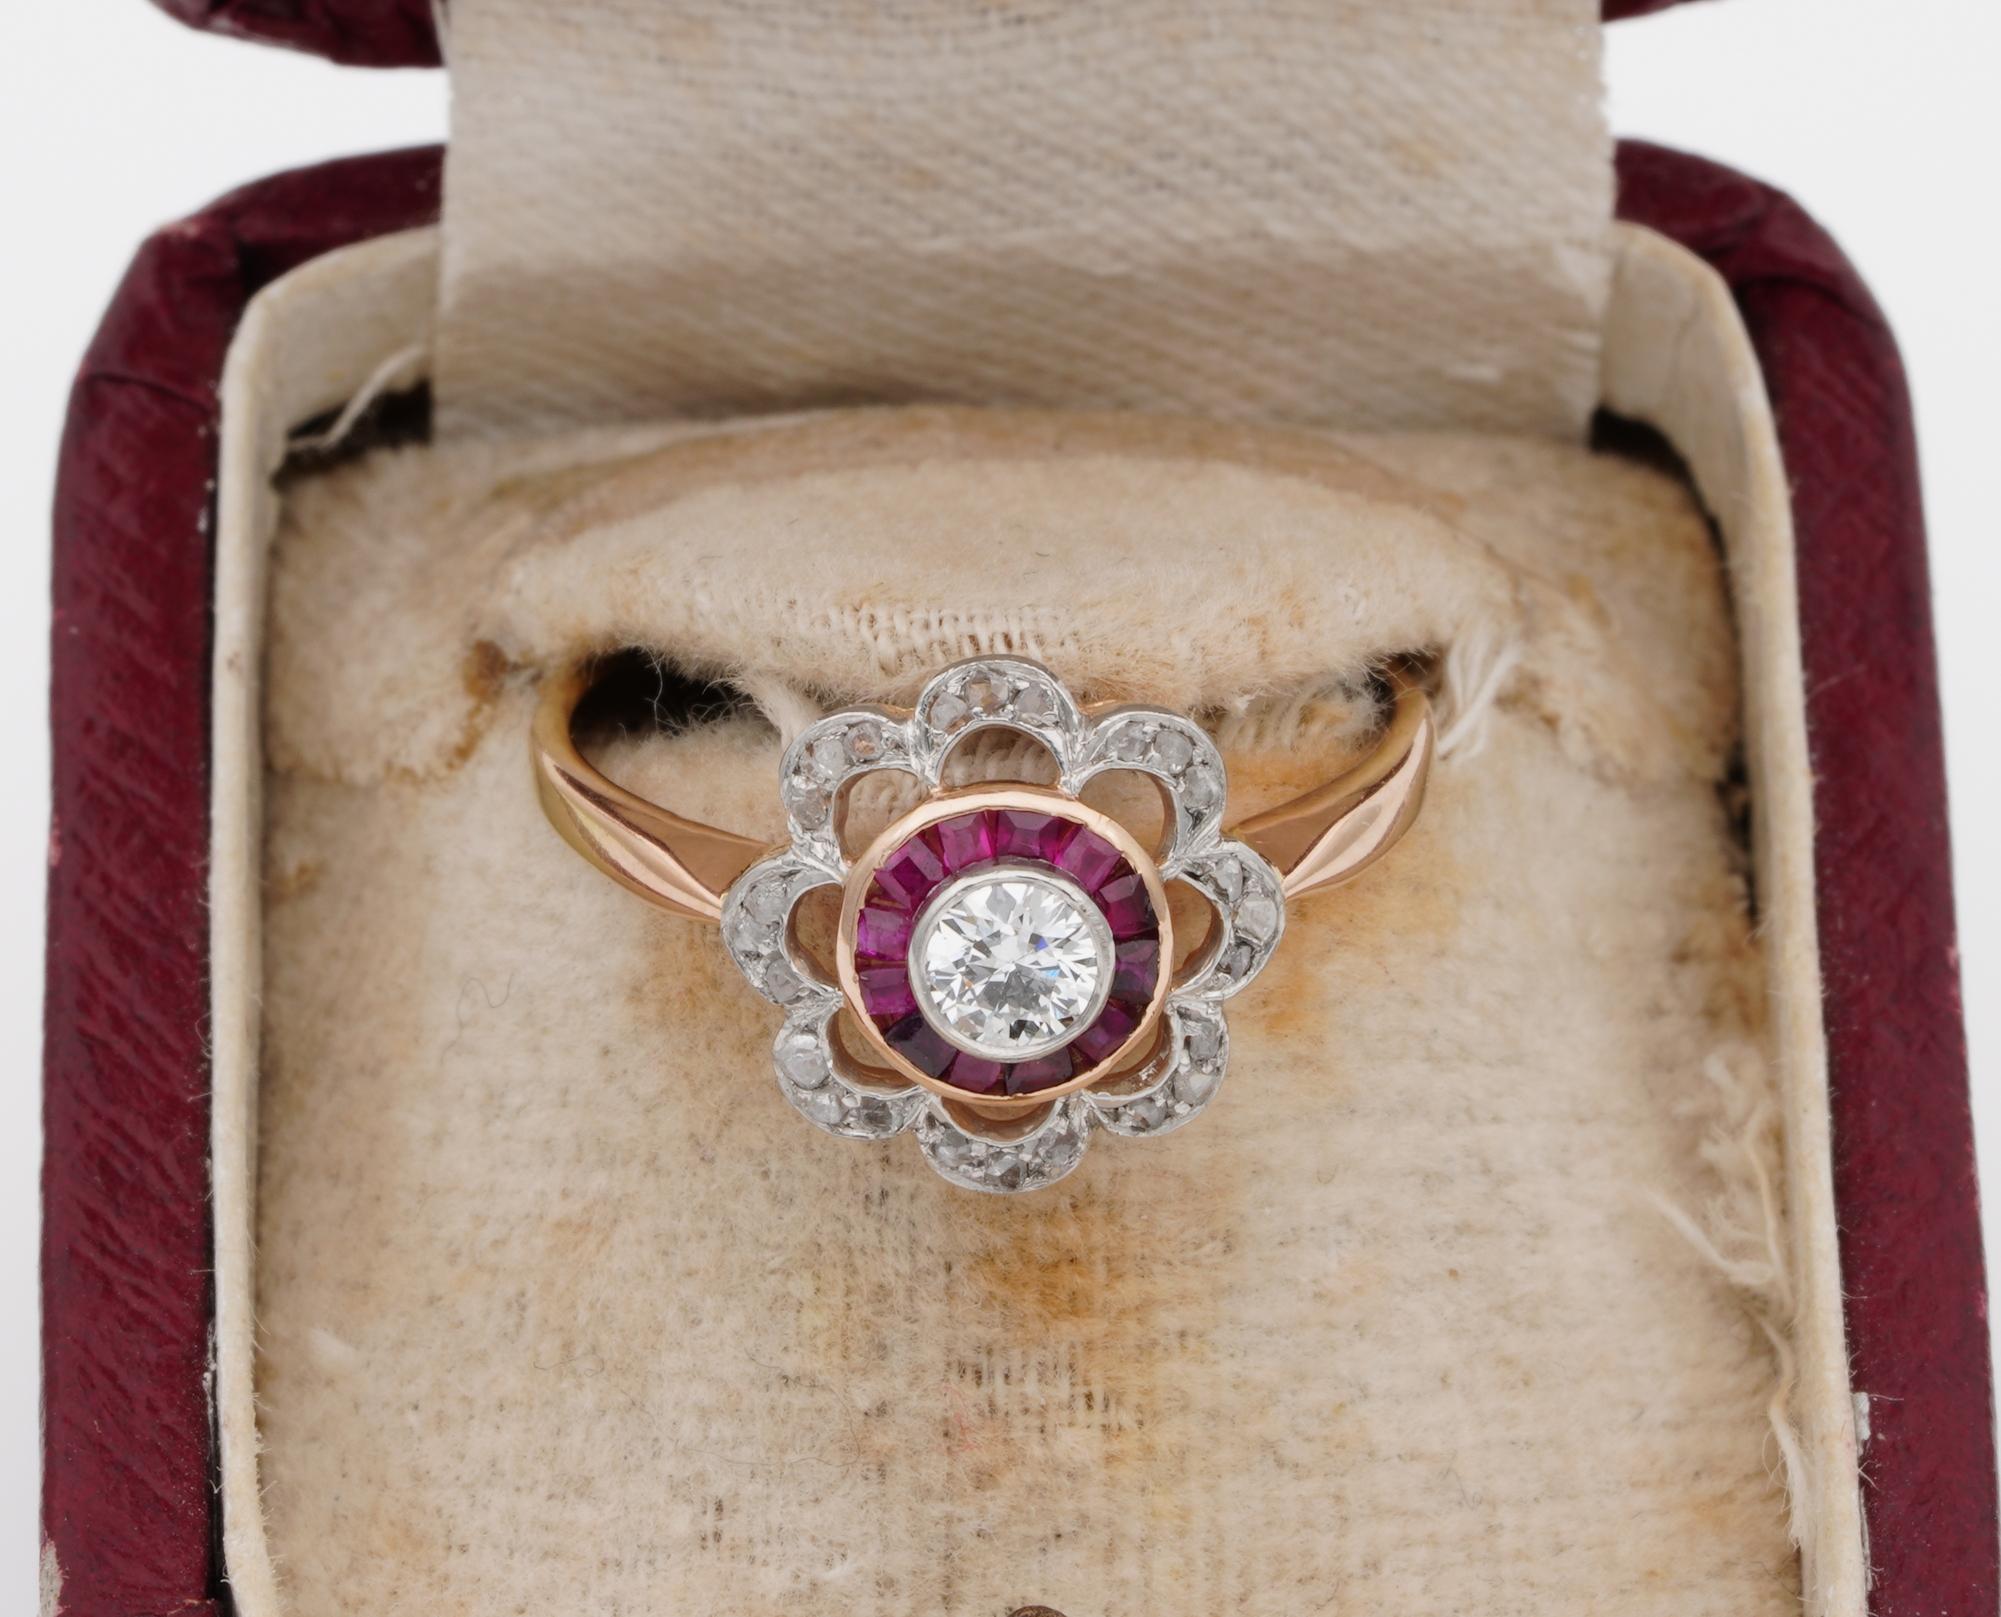 Eye catching Grace

Belle Epoque or Edwardian 1910 ca – low profile sitting very flat on finger
Charming flower inspired with sinuous undulated petals bordering the fine centre target design defined with Red Rubies and Diamond Sparkle
Truly gorgeous